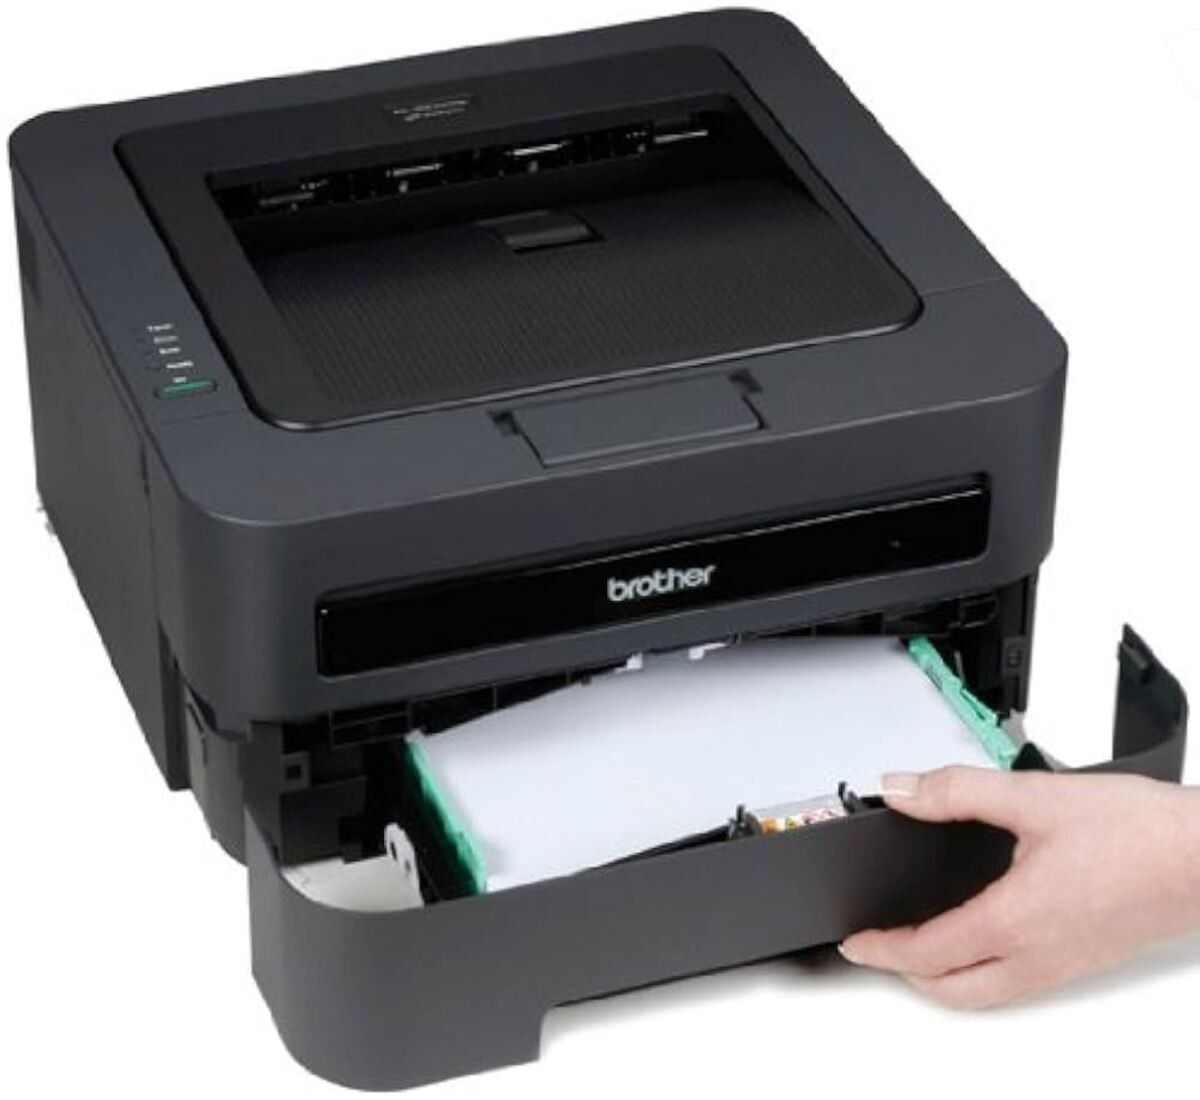 how-to-connect-brother-printer-hl-2270dw-wireless